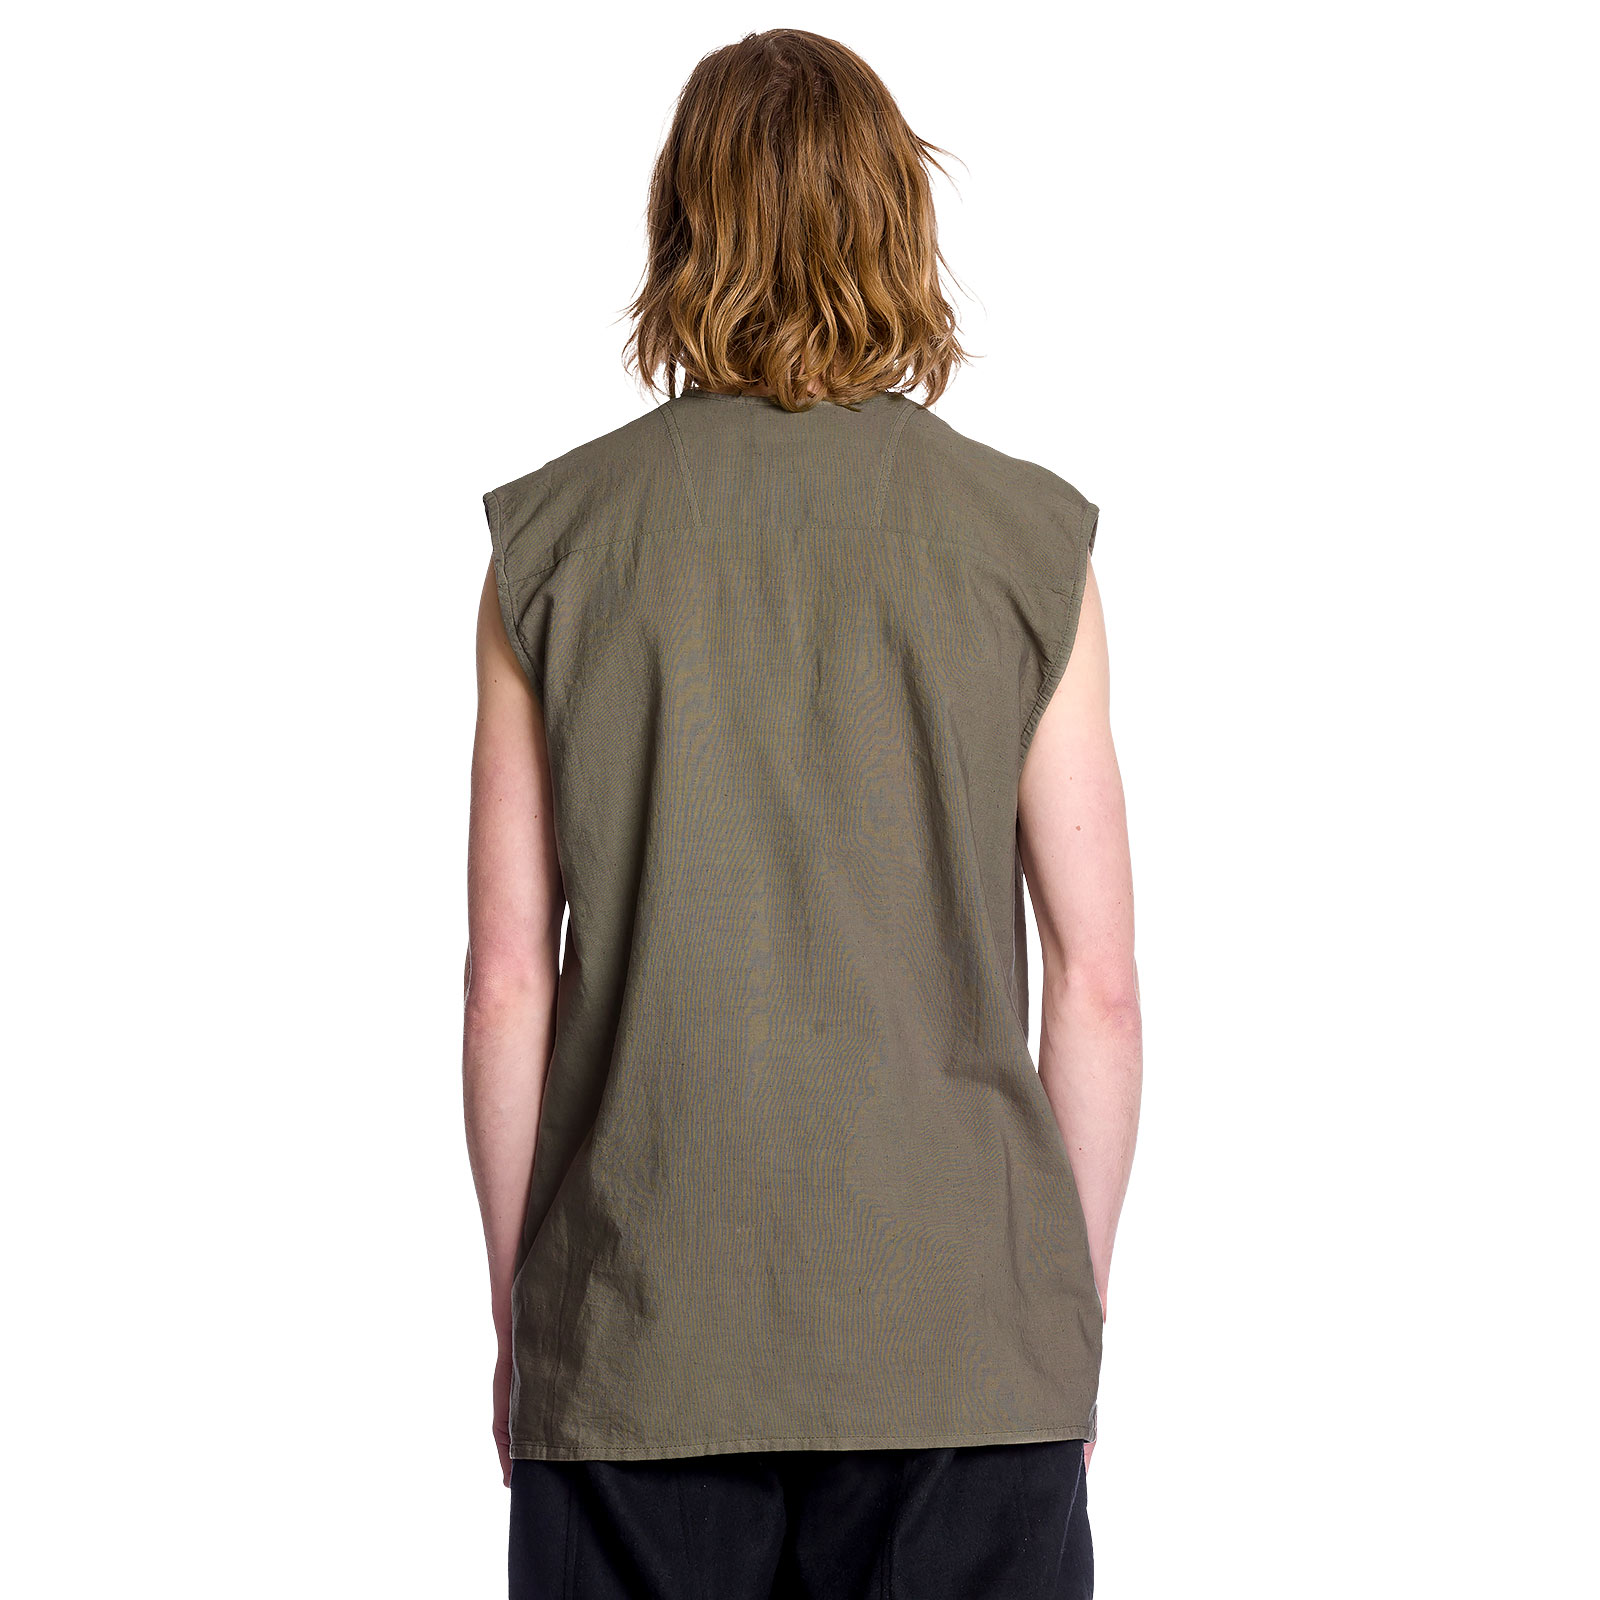 Medieval lace-up shirt sleeveless olive